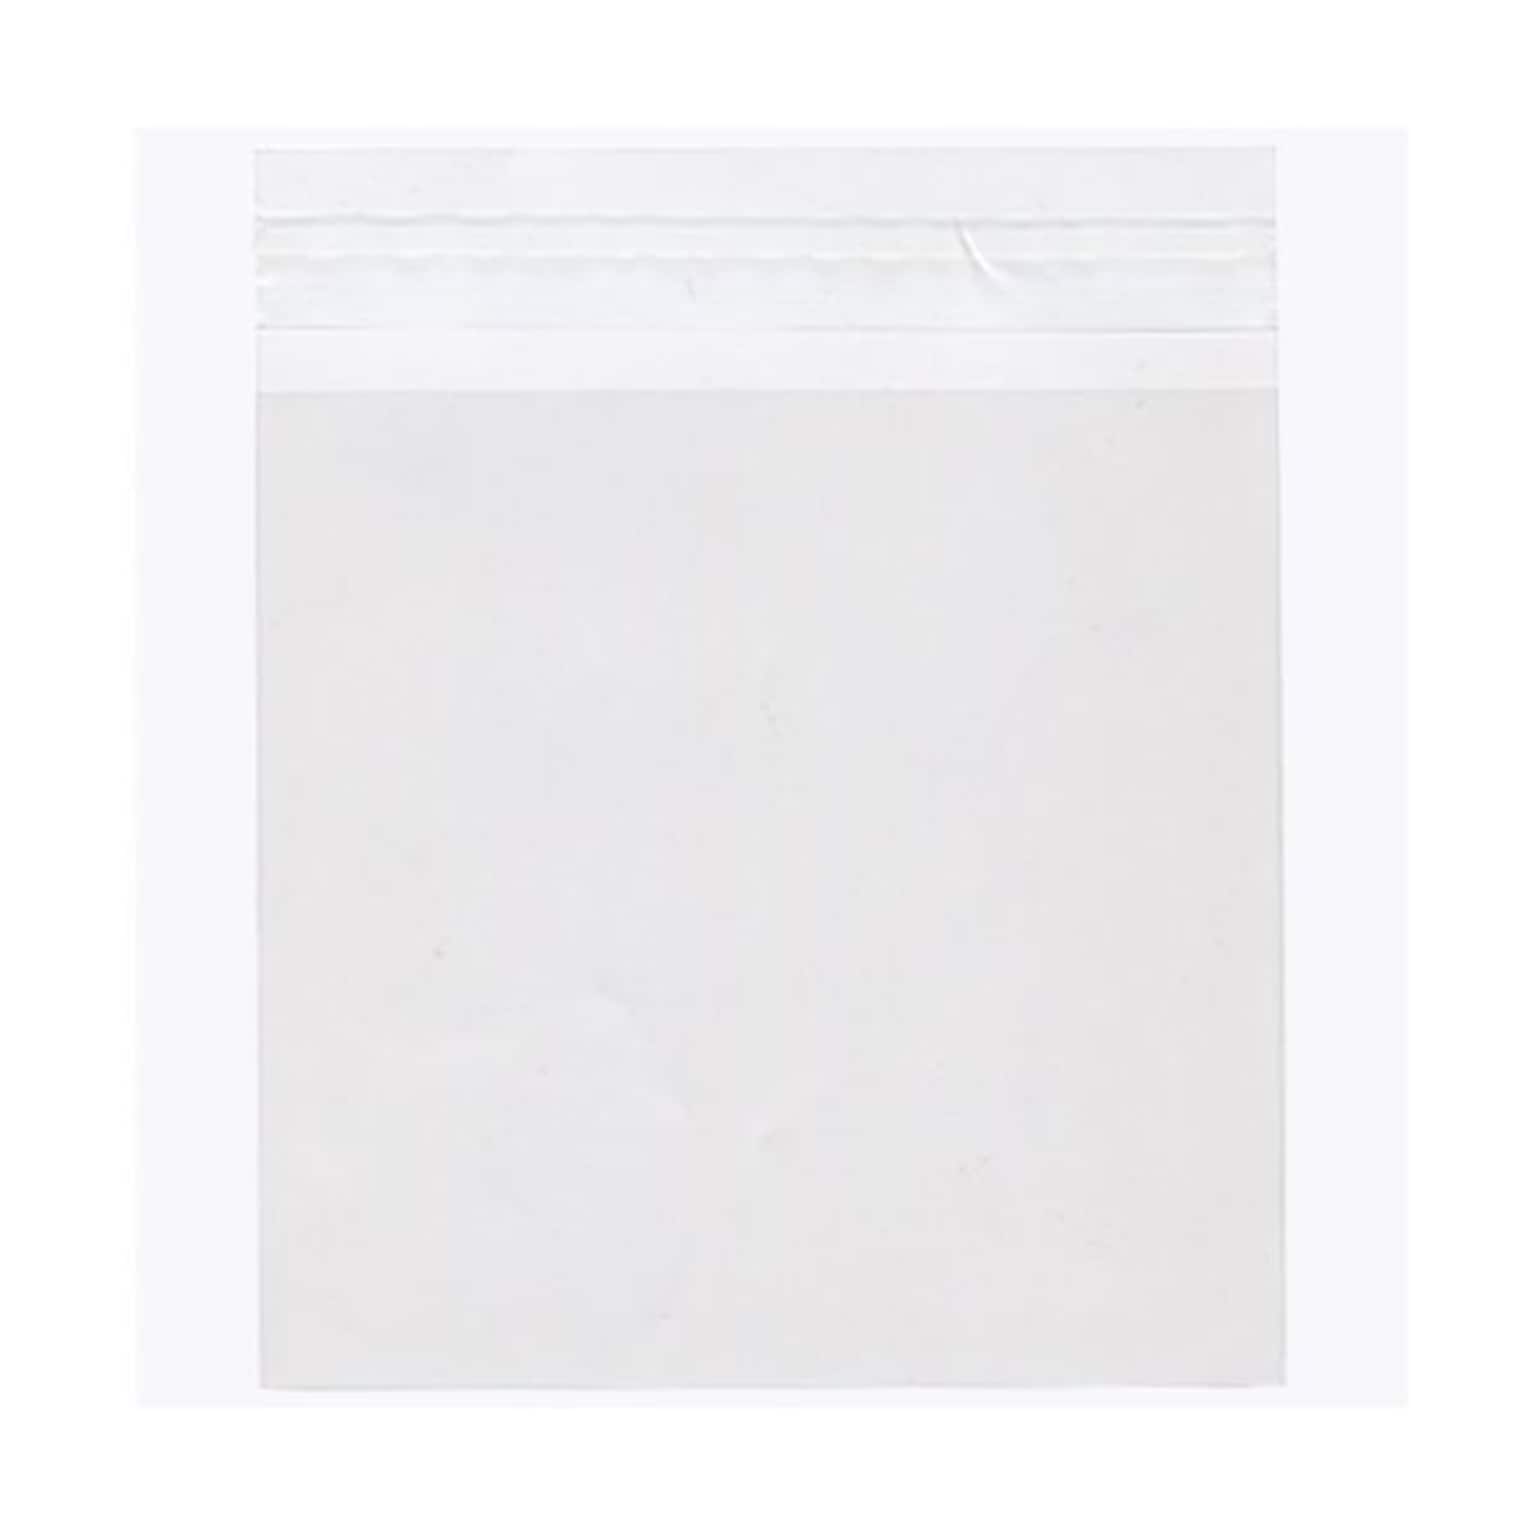 JAM Paper Cellophane Envelope with Peel & Seal Closure, 5.25 x 5.25, Clear, 100/Pack (5.25X5.25CELLO)